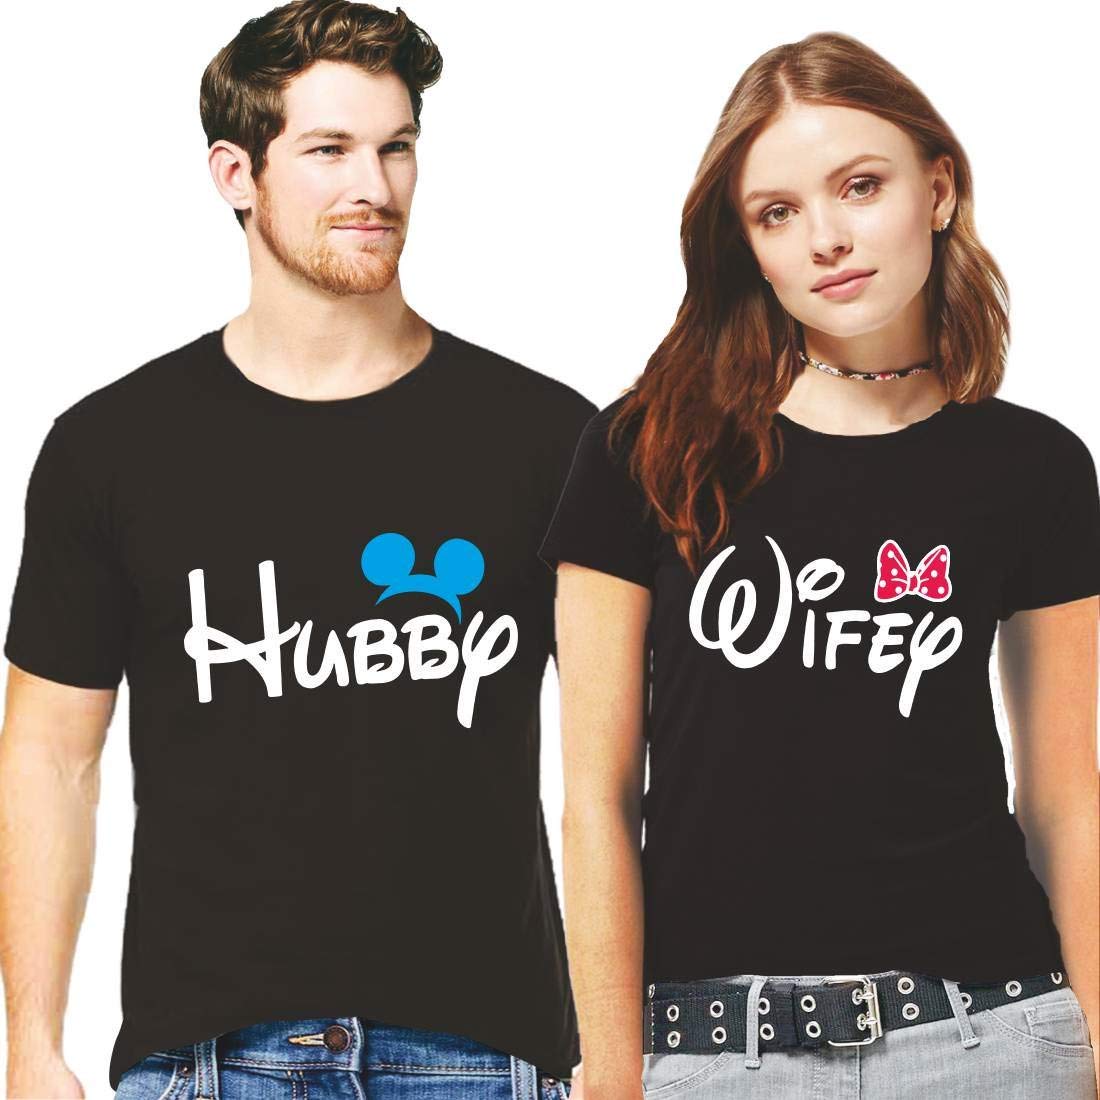 DOUBLE F BLACK COLOR HUBBY WIFEY PRINTED COUPLE T-SHIRTS